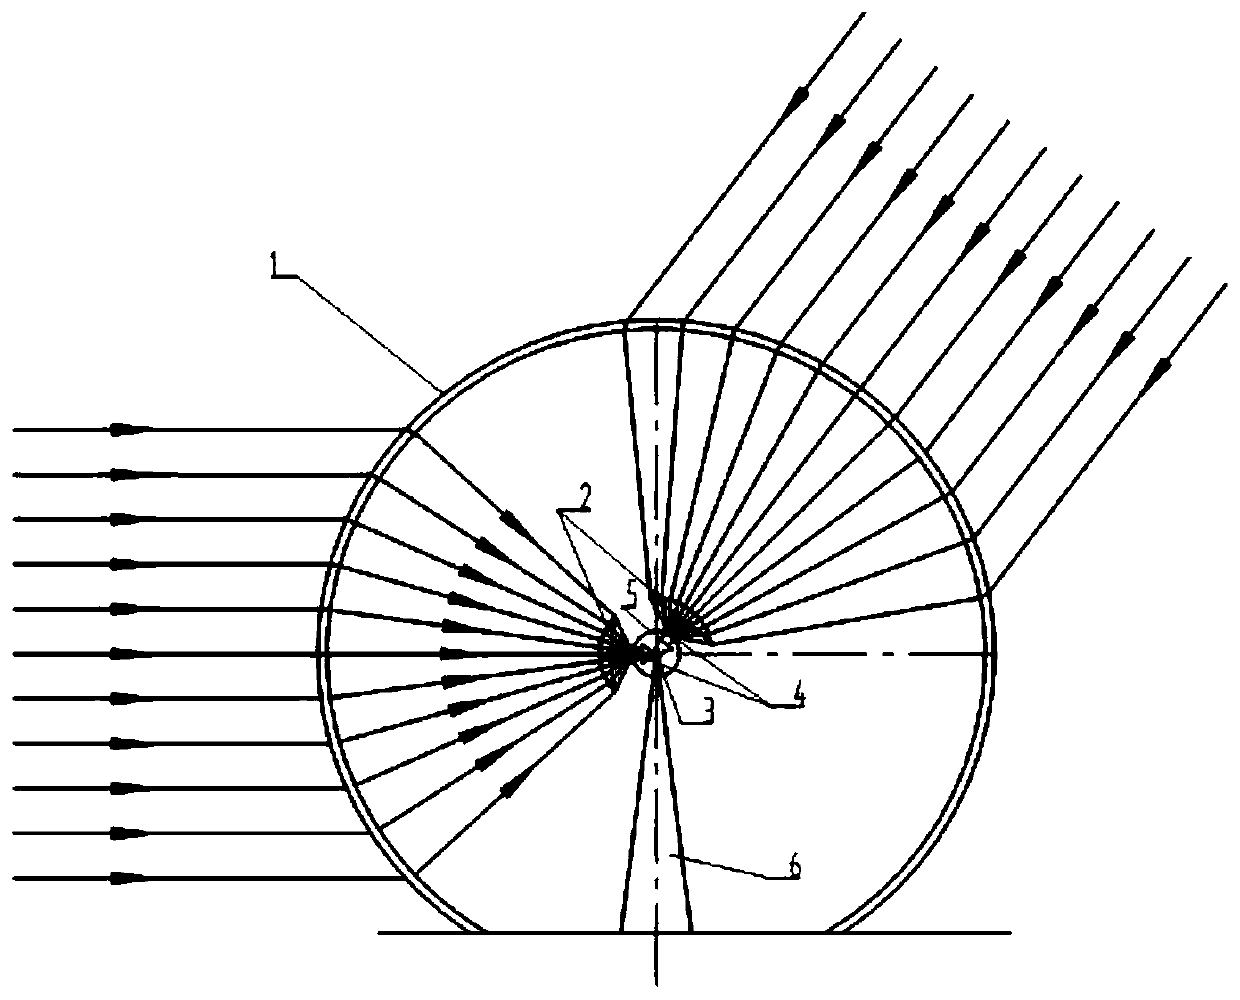 Large-aperture wide-angle scanning multi-beam antenna